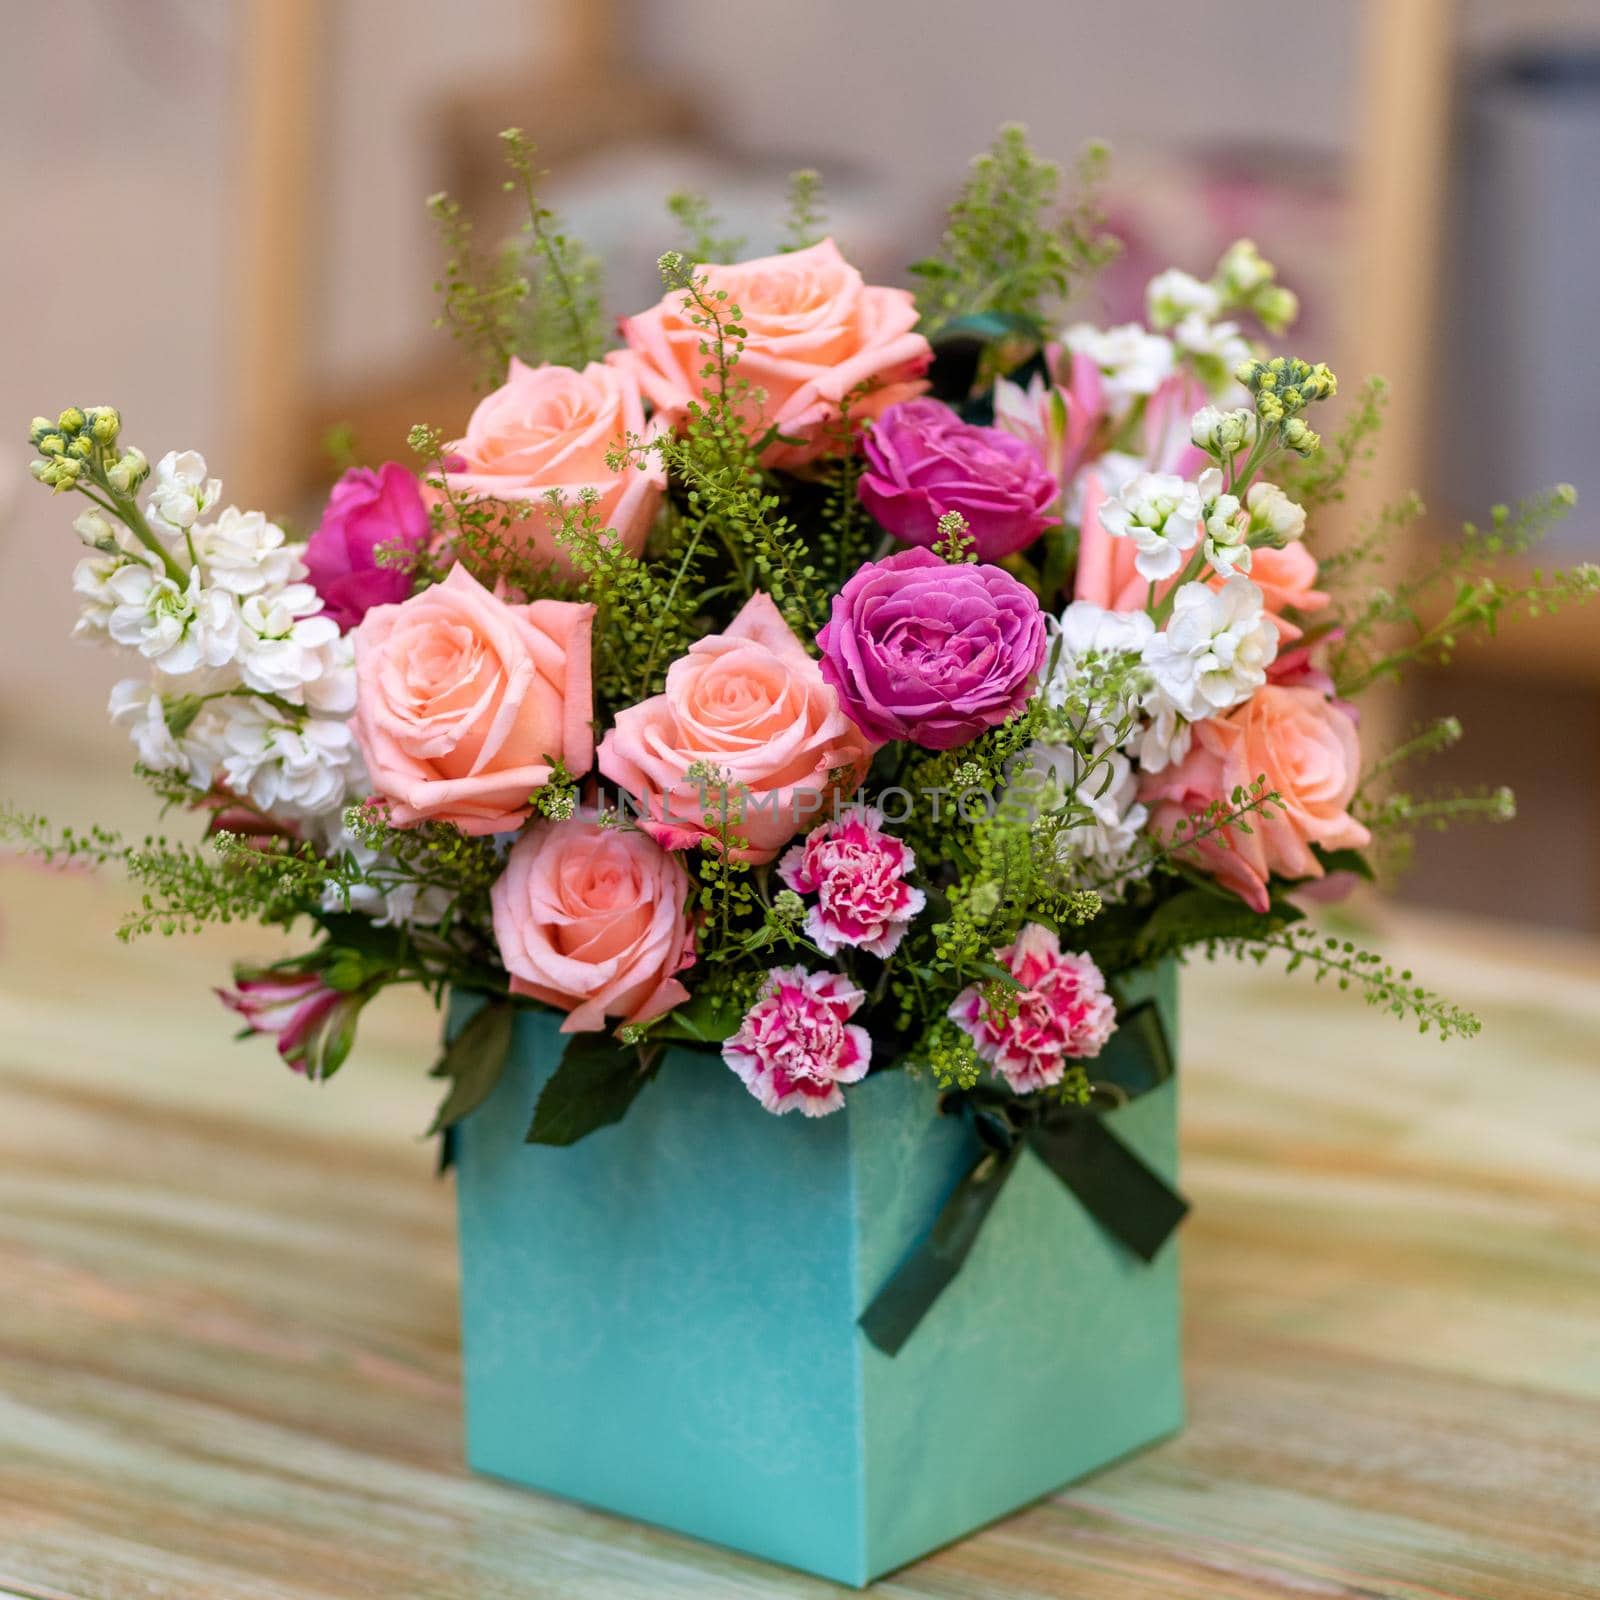 Beautiful flower bouquet in the box by ferhad